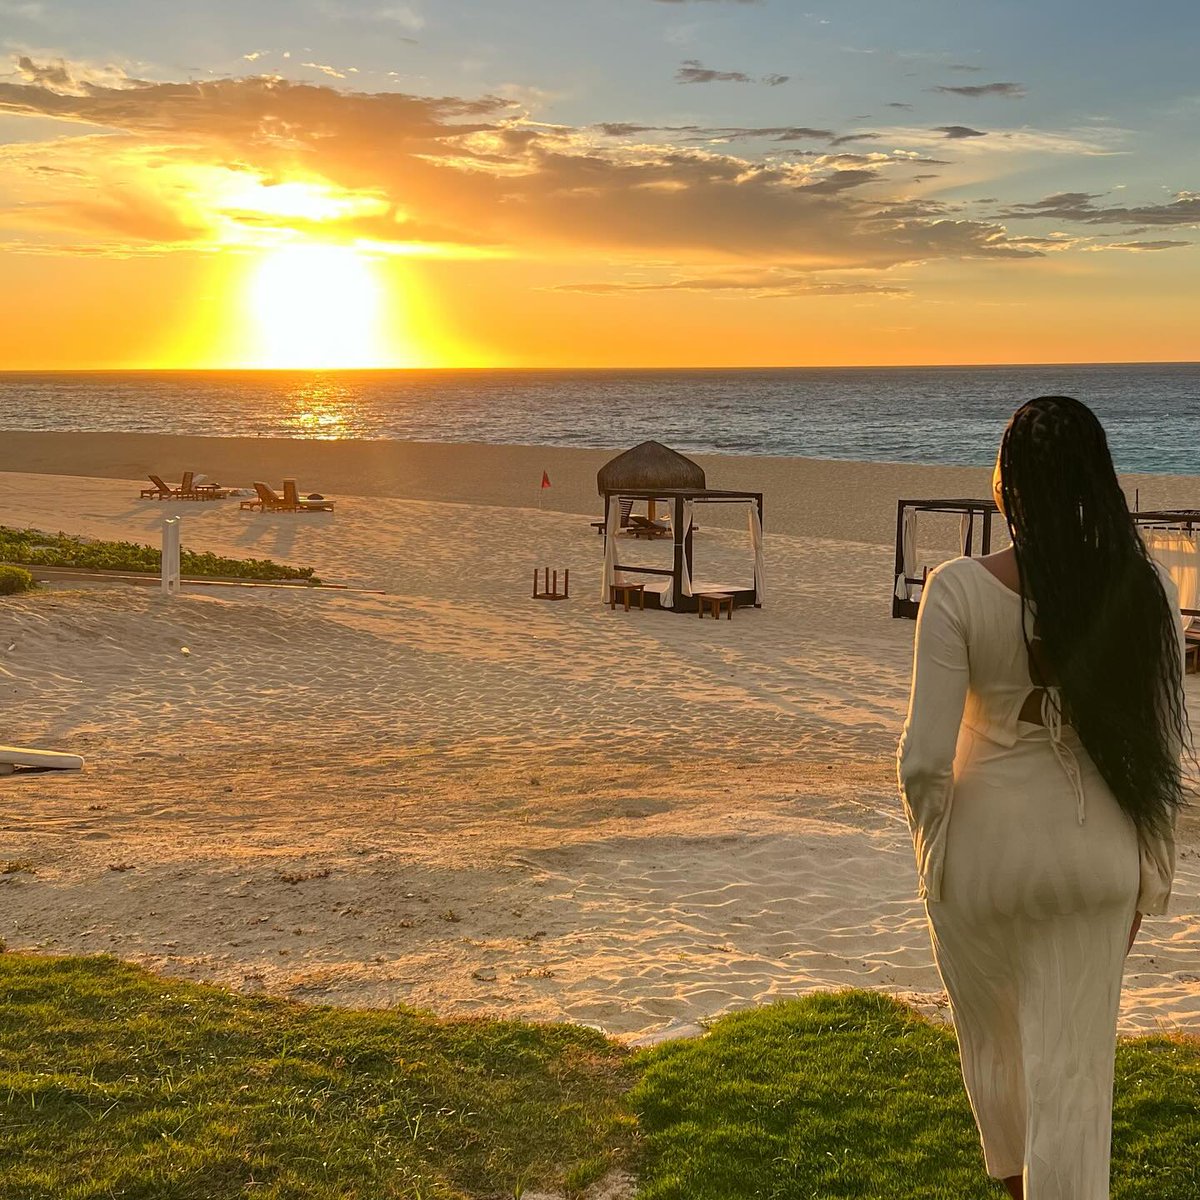 Let the sand beneath your feet and the ocean's rhythm inspire you at #ZoëtryCasadelMar. 
Connect with the moment, embracing seaside serenity with each reflective intention. spr.ly/6013kaAmb

📷 : @angellaagrace